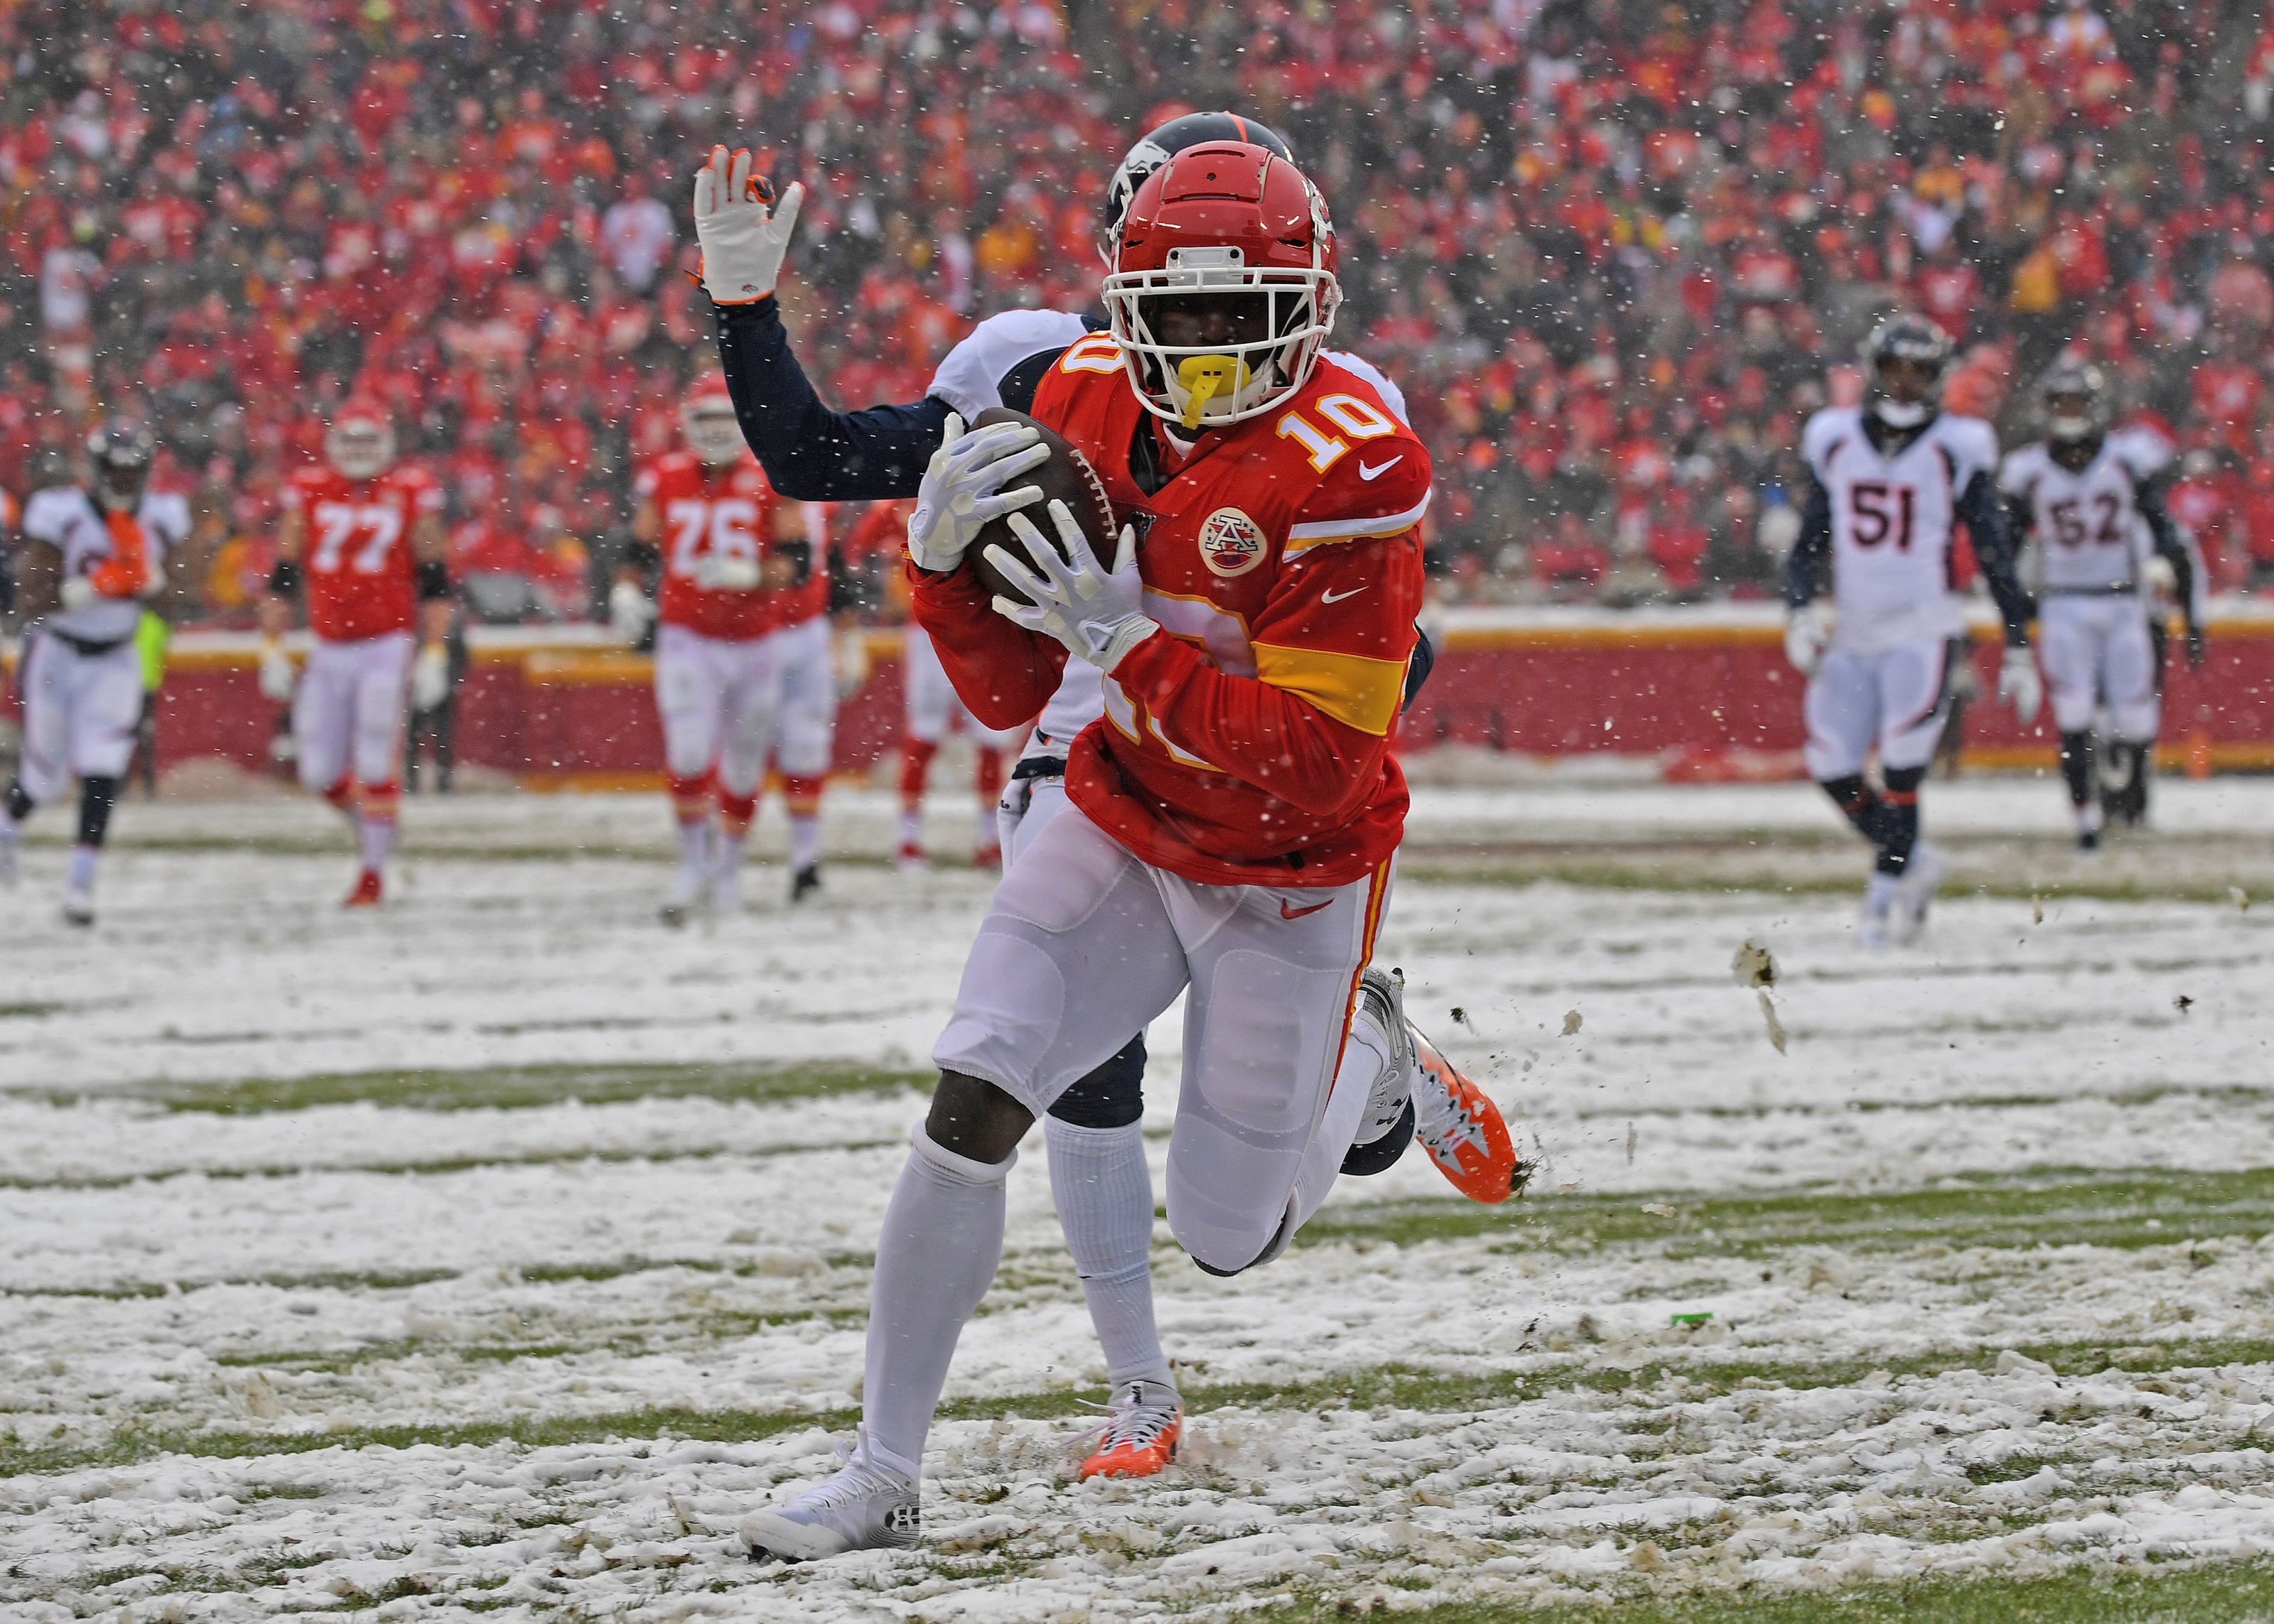 Tyreek Hill’s touchdown leads Top 5 plays from Broncos vs. Chiefs